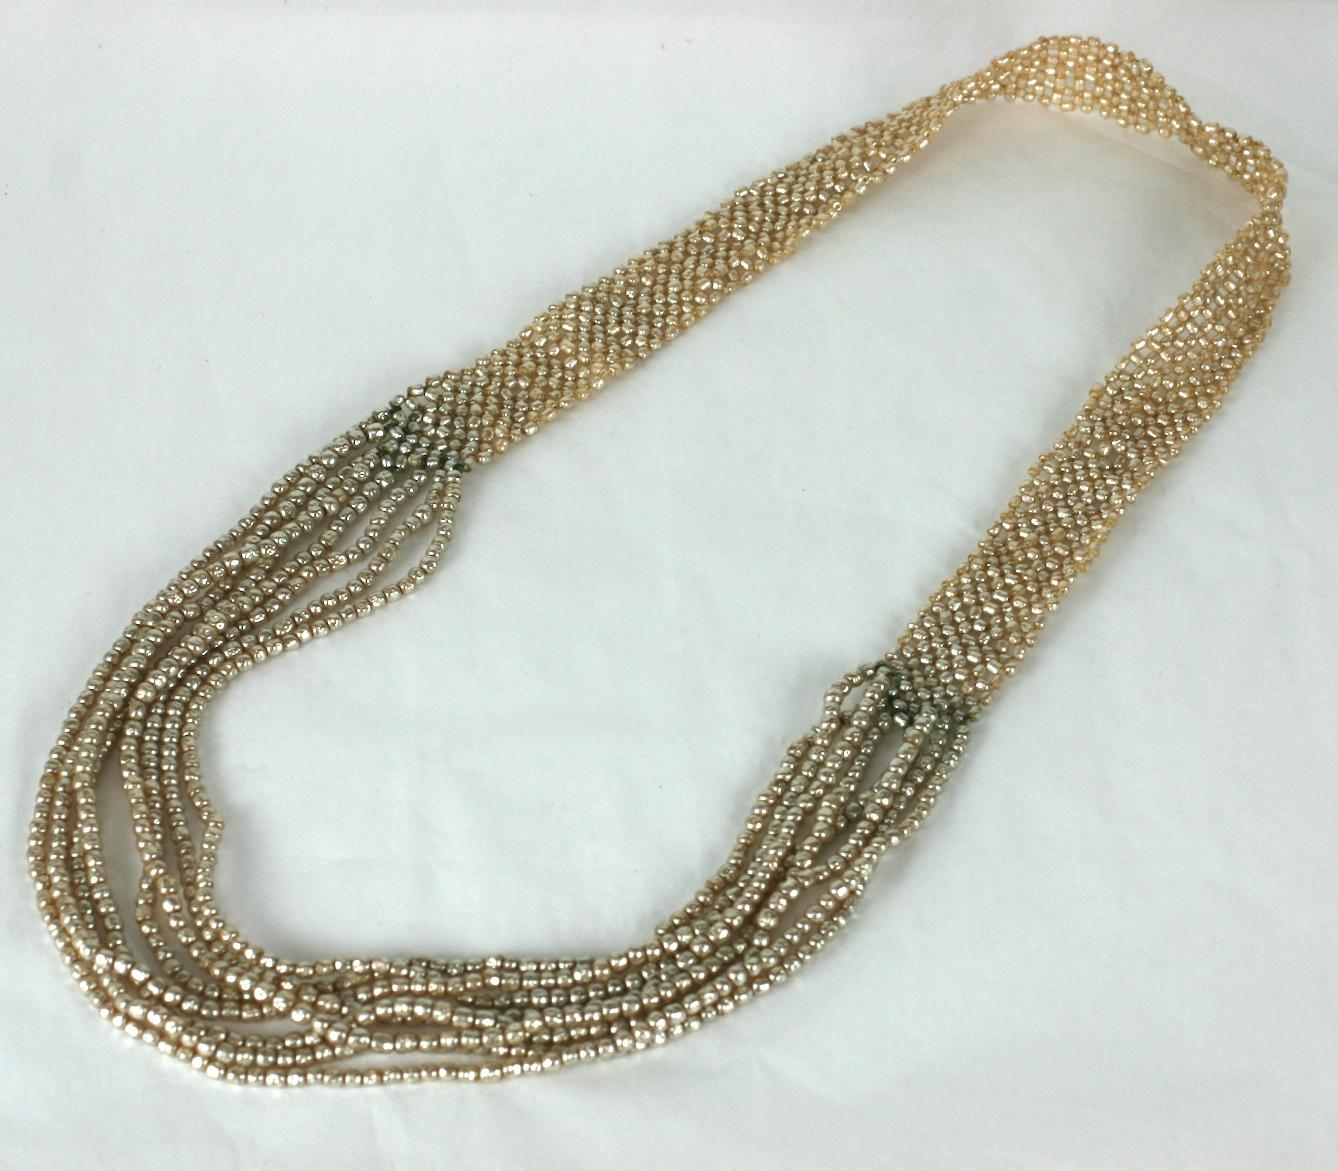 Amazing and rare Miriam Haskell necklace of woven signature baroque faux pearls. The overall basket woven pattern terminates in draped multi strands of baroque faux pearls. 
Excellent Condition, 1940's USA. 
Woven area 1